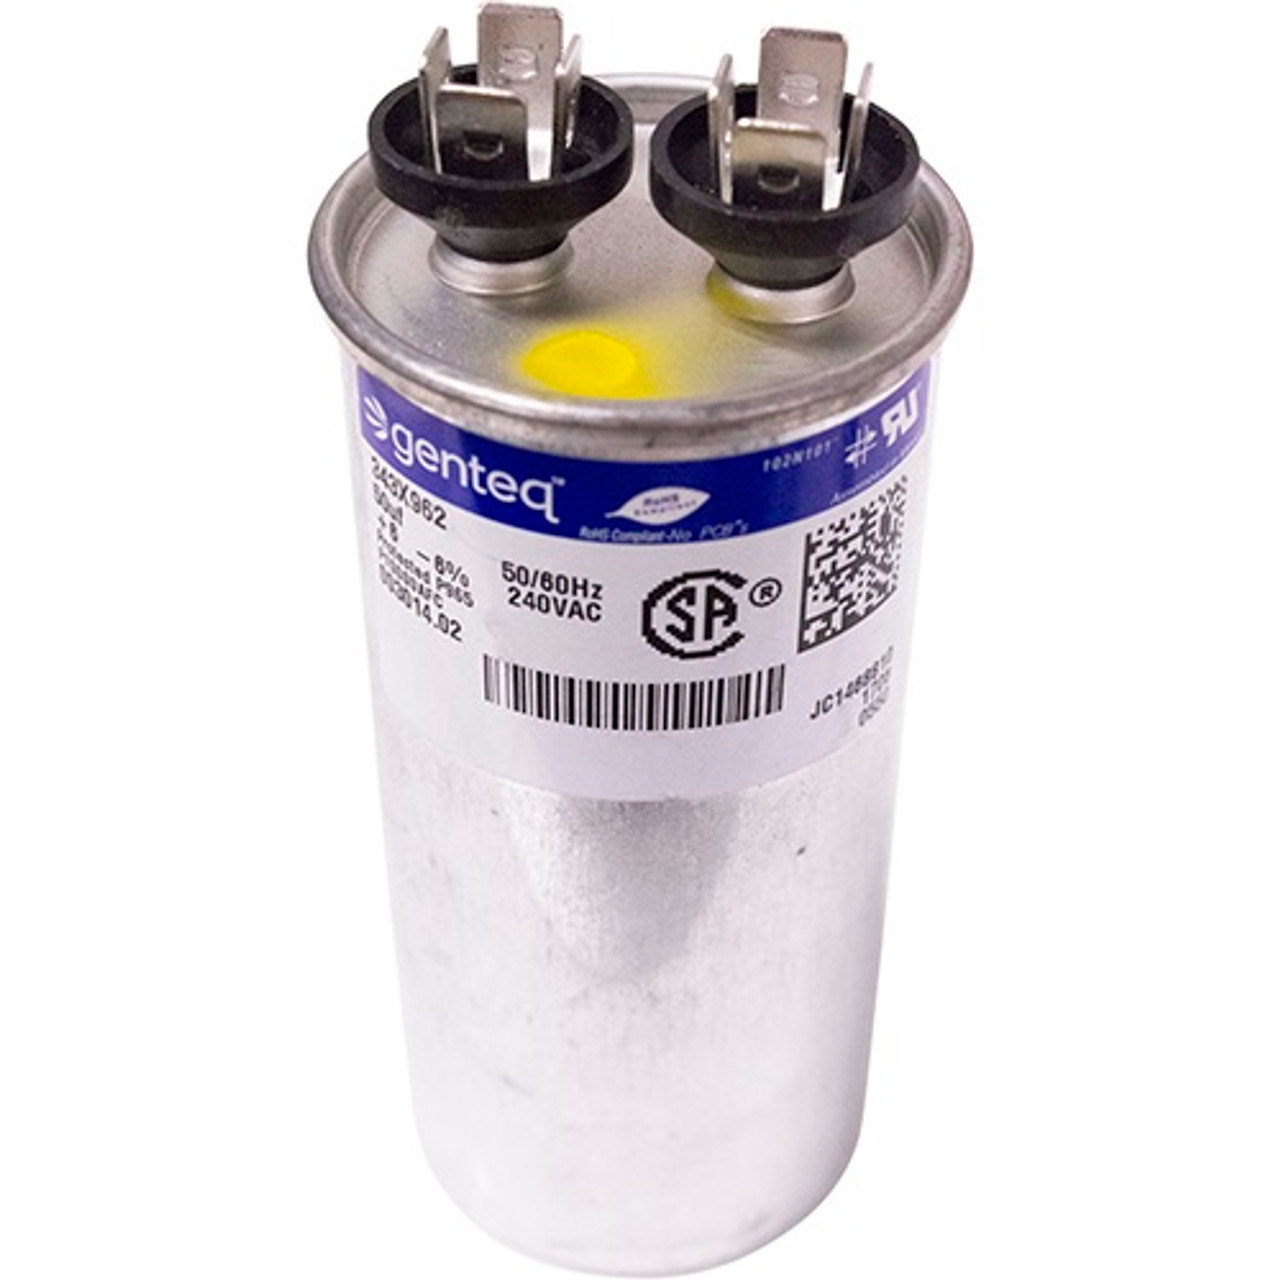 Capacitor, Run ,2Hp 1Ph 230V - Replacement Part For Power Soak Systems PWSK29580